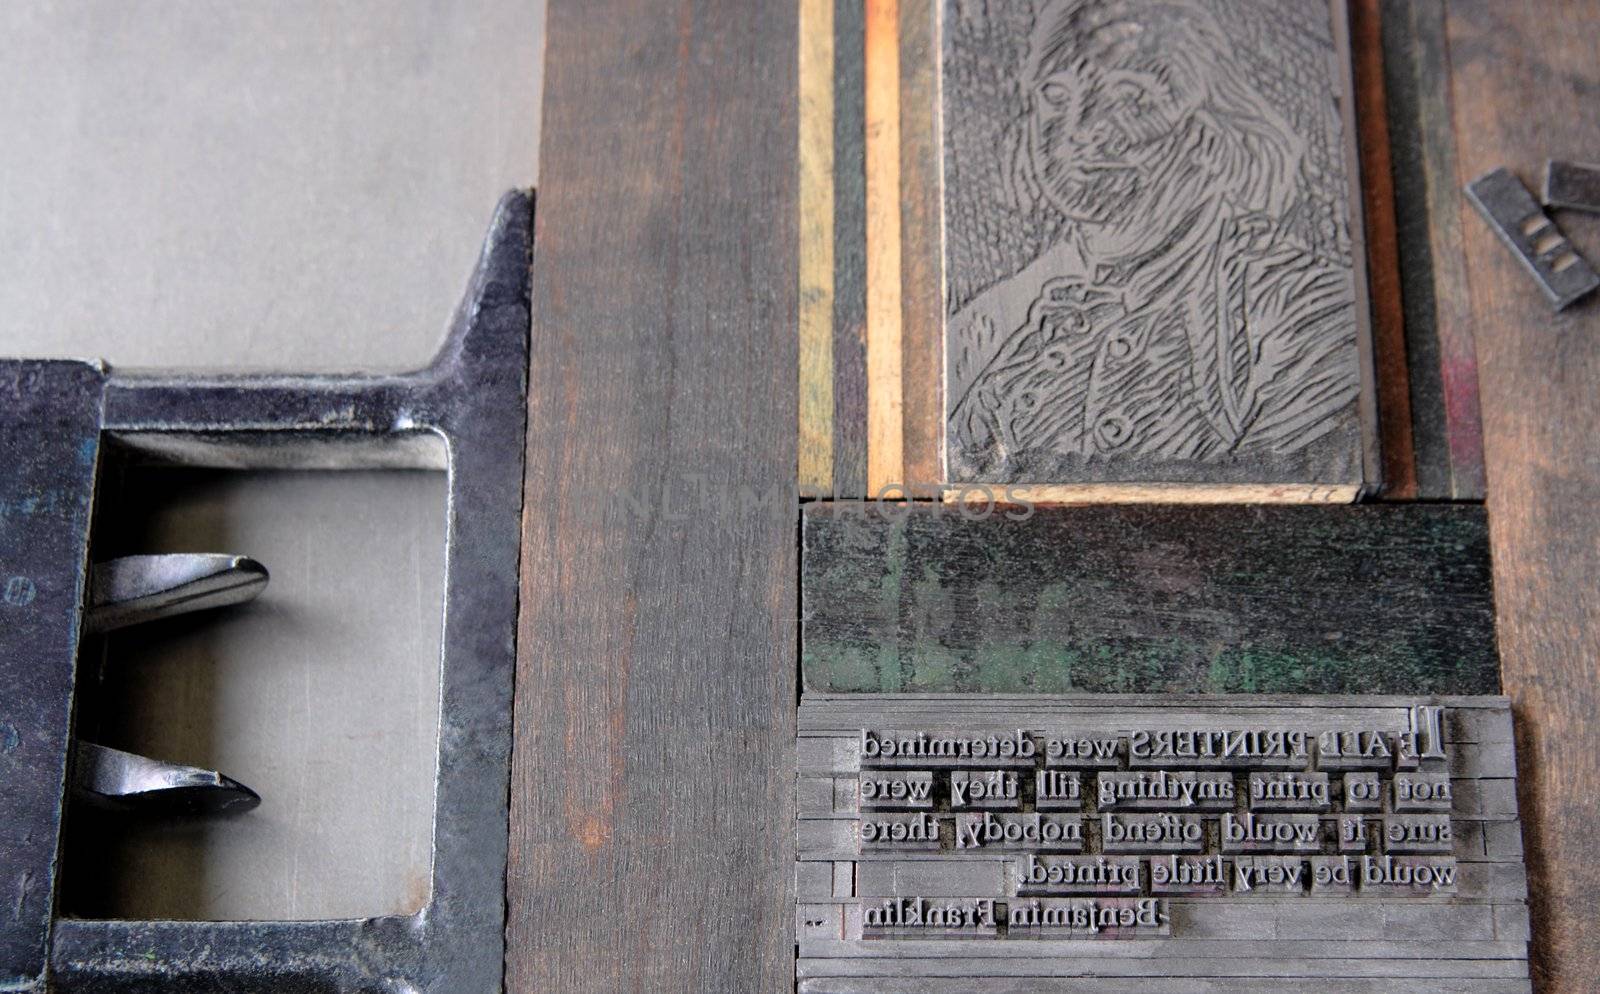 a printer's tray holds a quote from Benjamin Franklin in lead type with a linoleum cut of Franklin